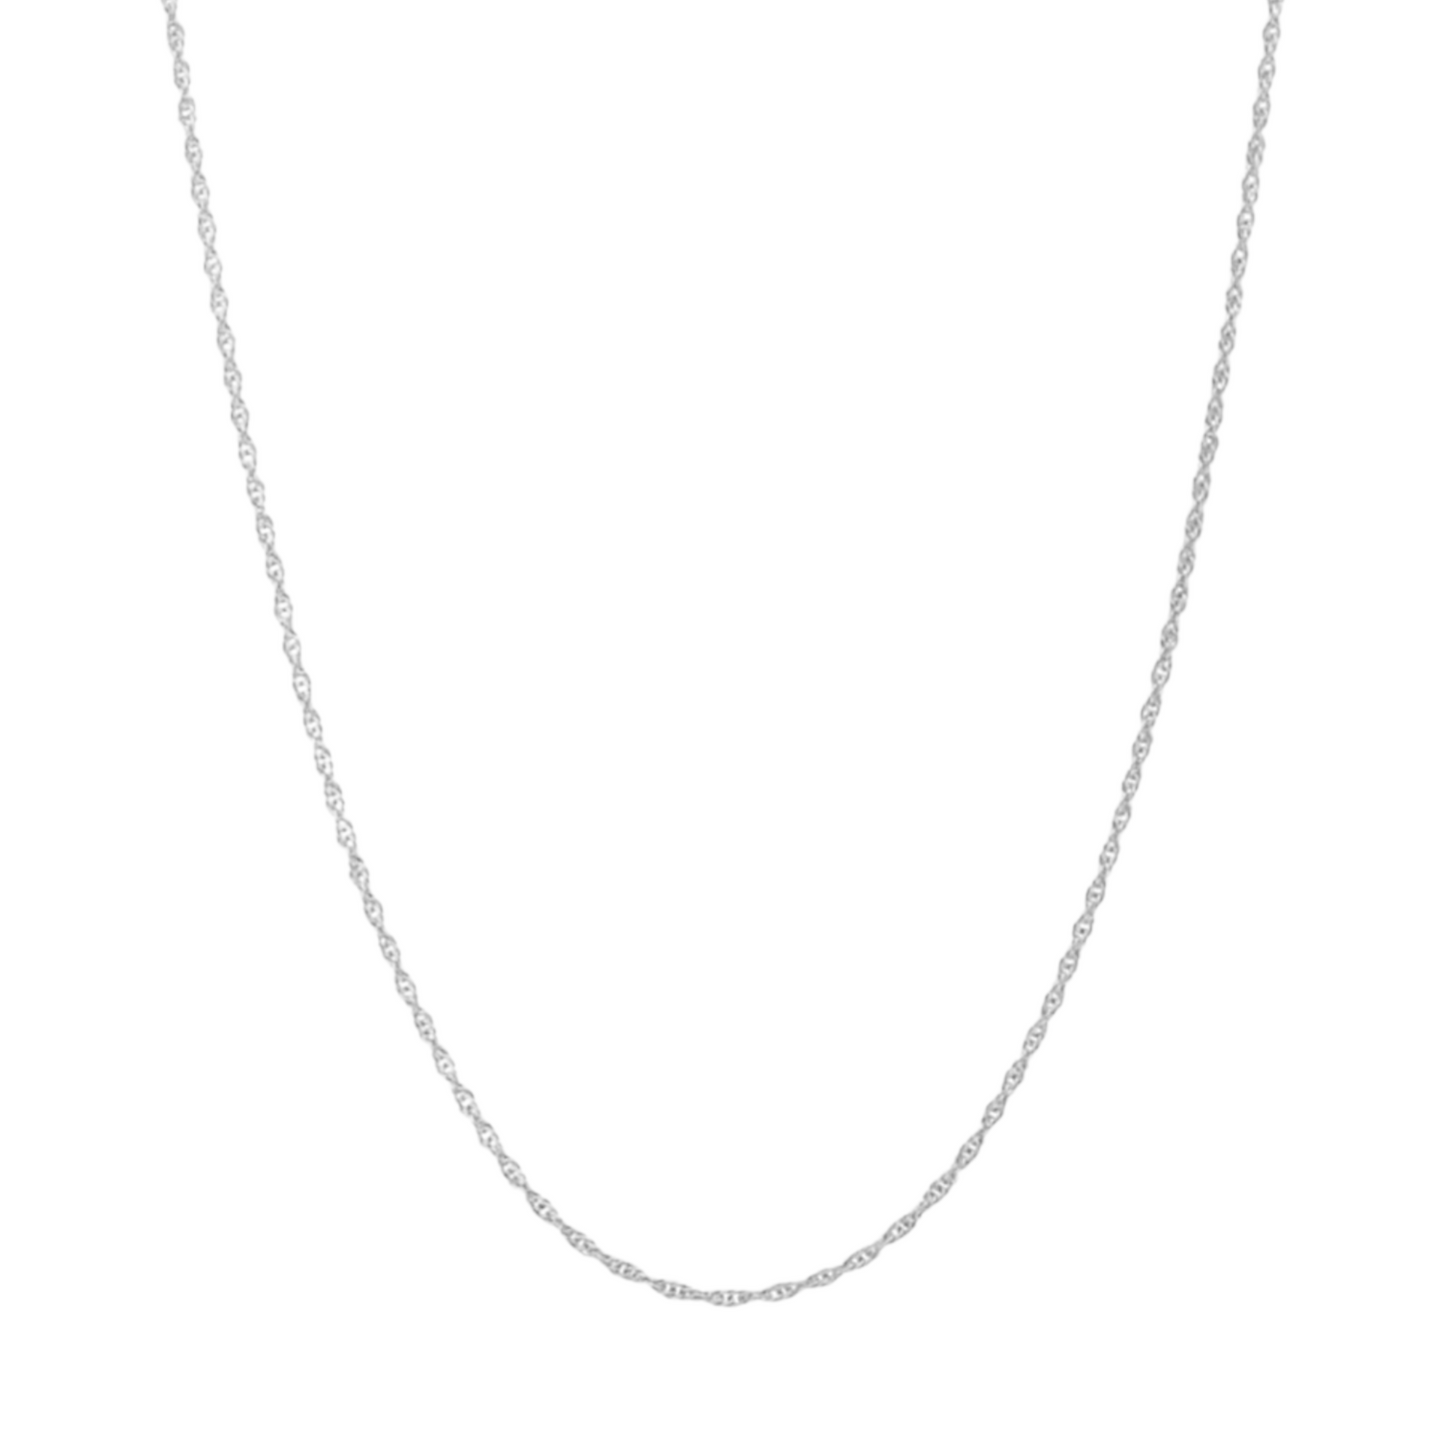 Chain Link 18" Necklace in Sterling Silver